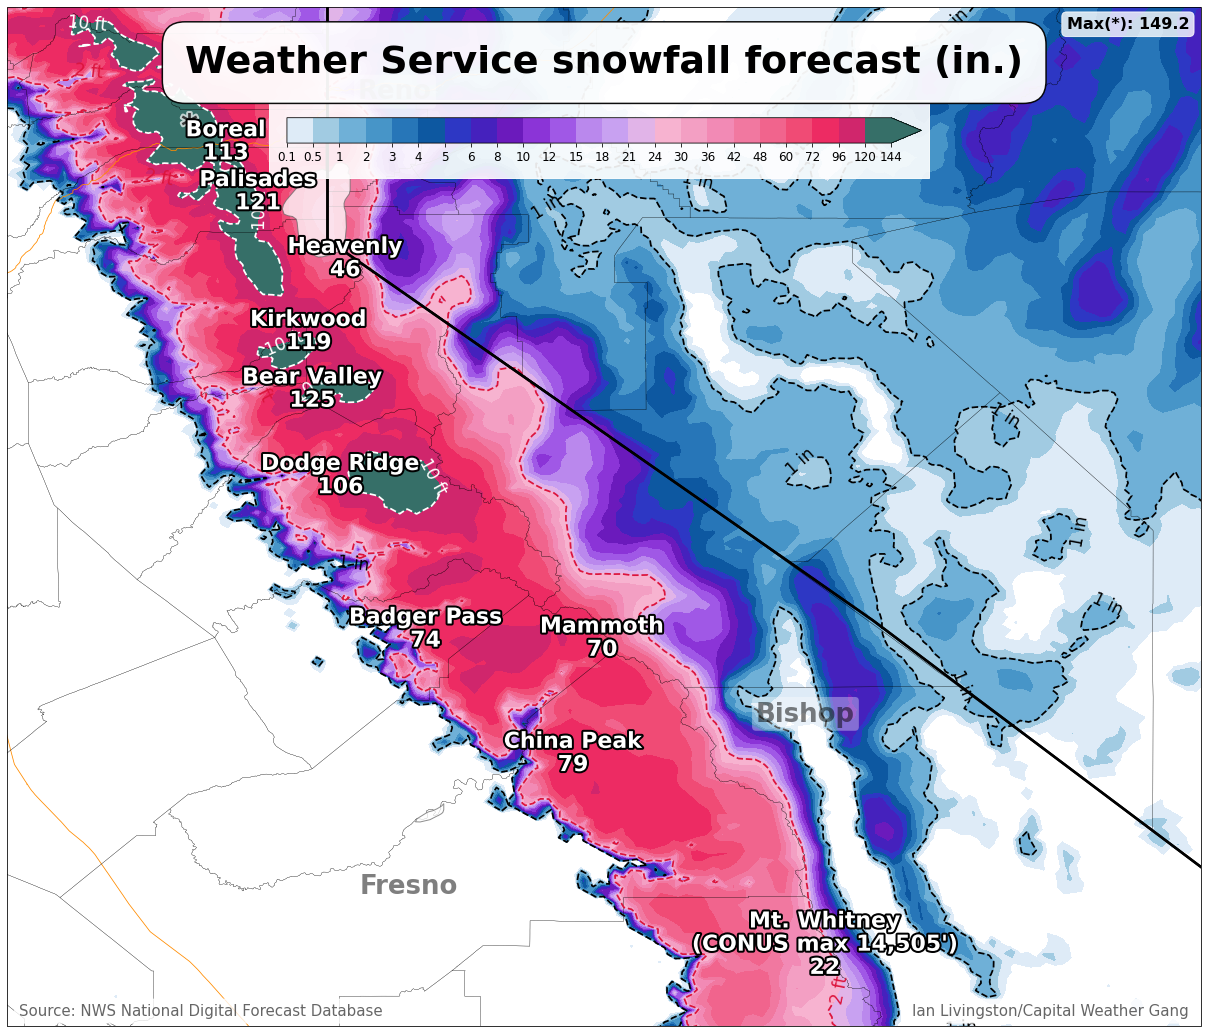 sierra bracing for extreme blizzard with 10 feet of snow, 100 mph winds